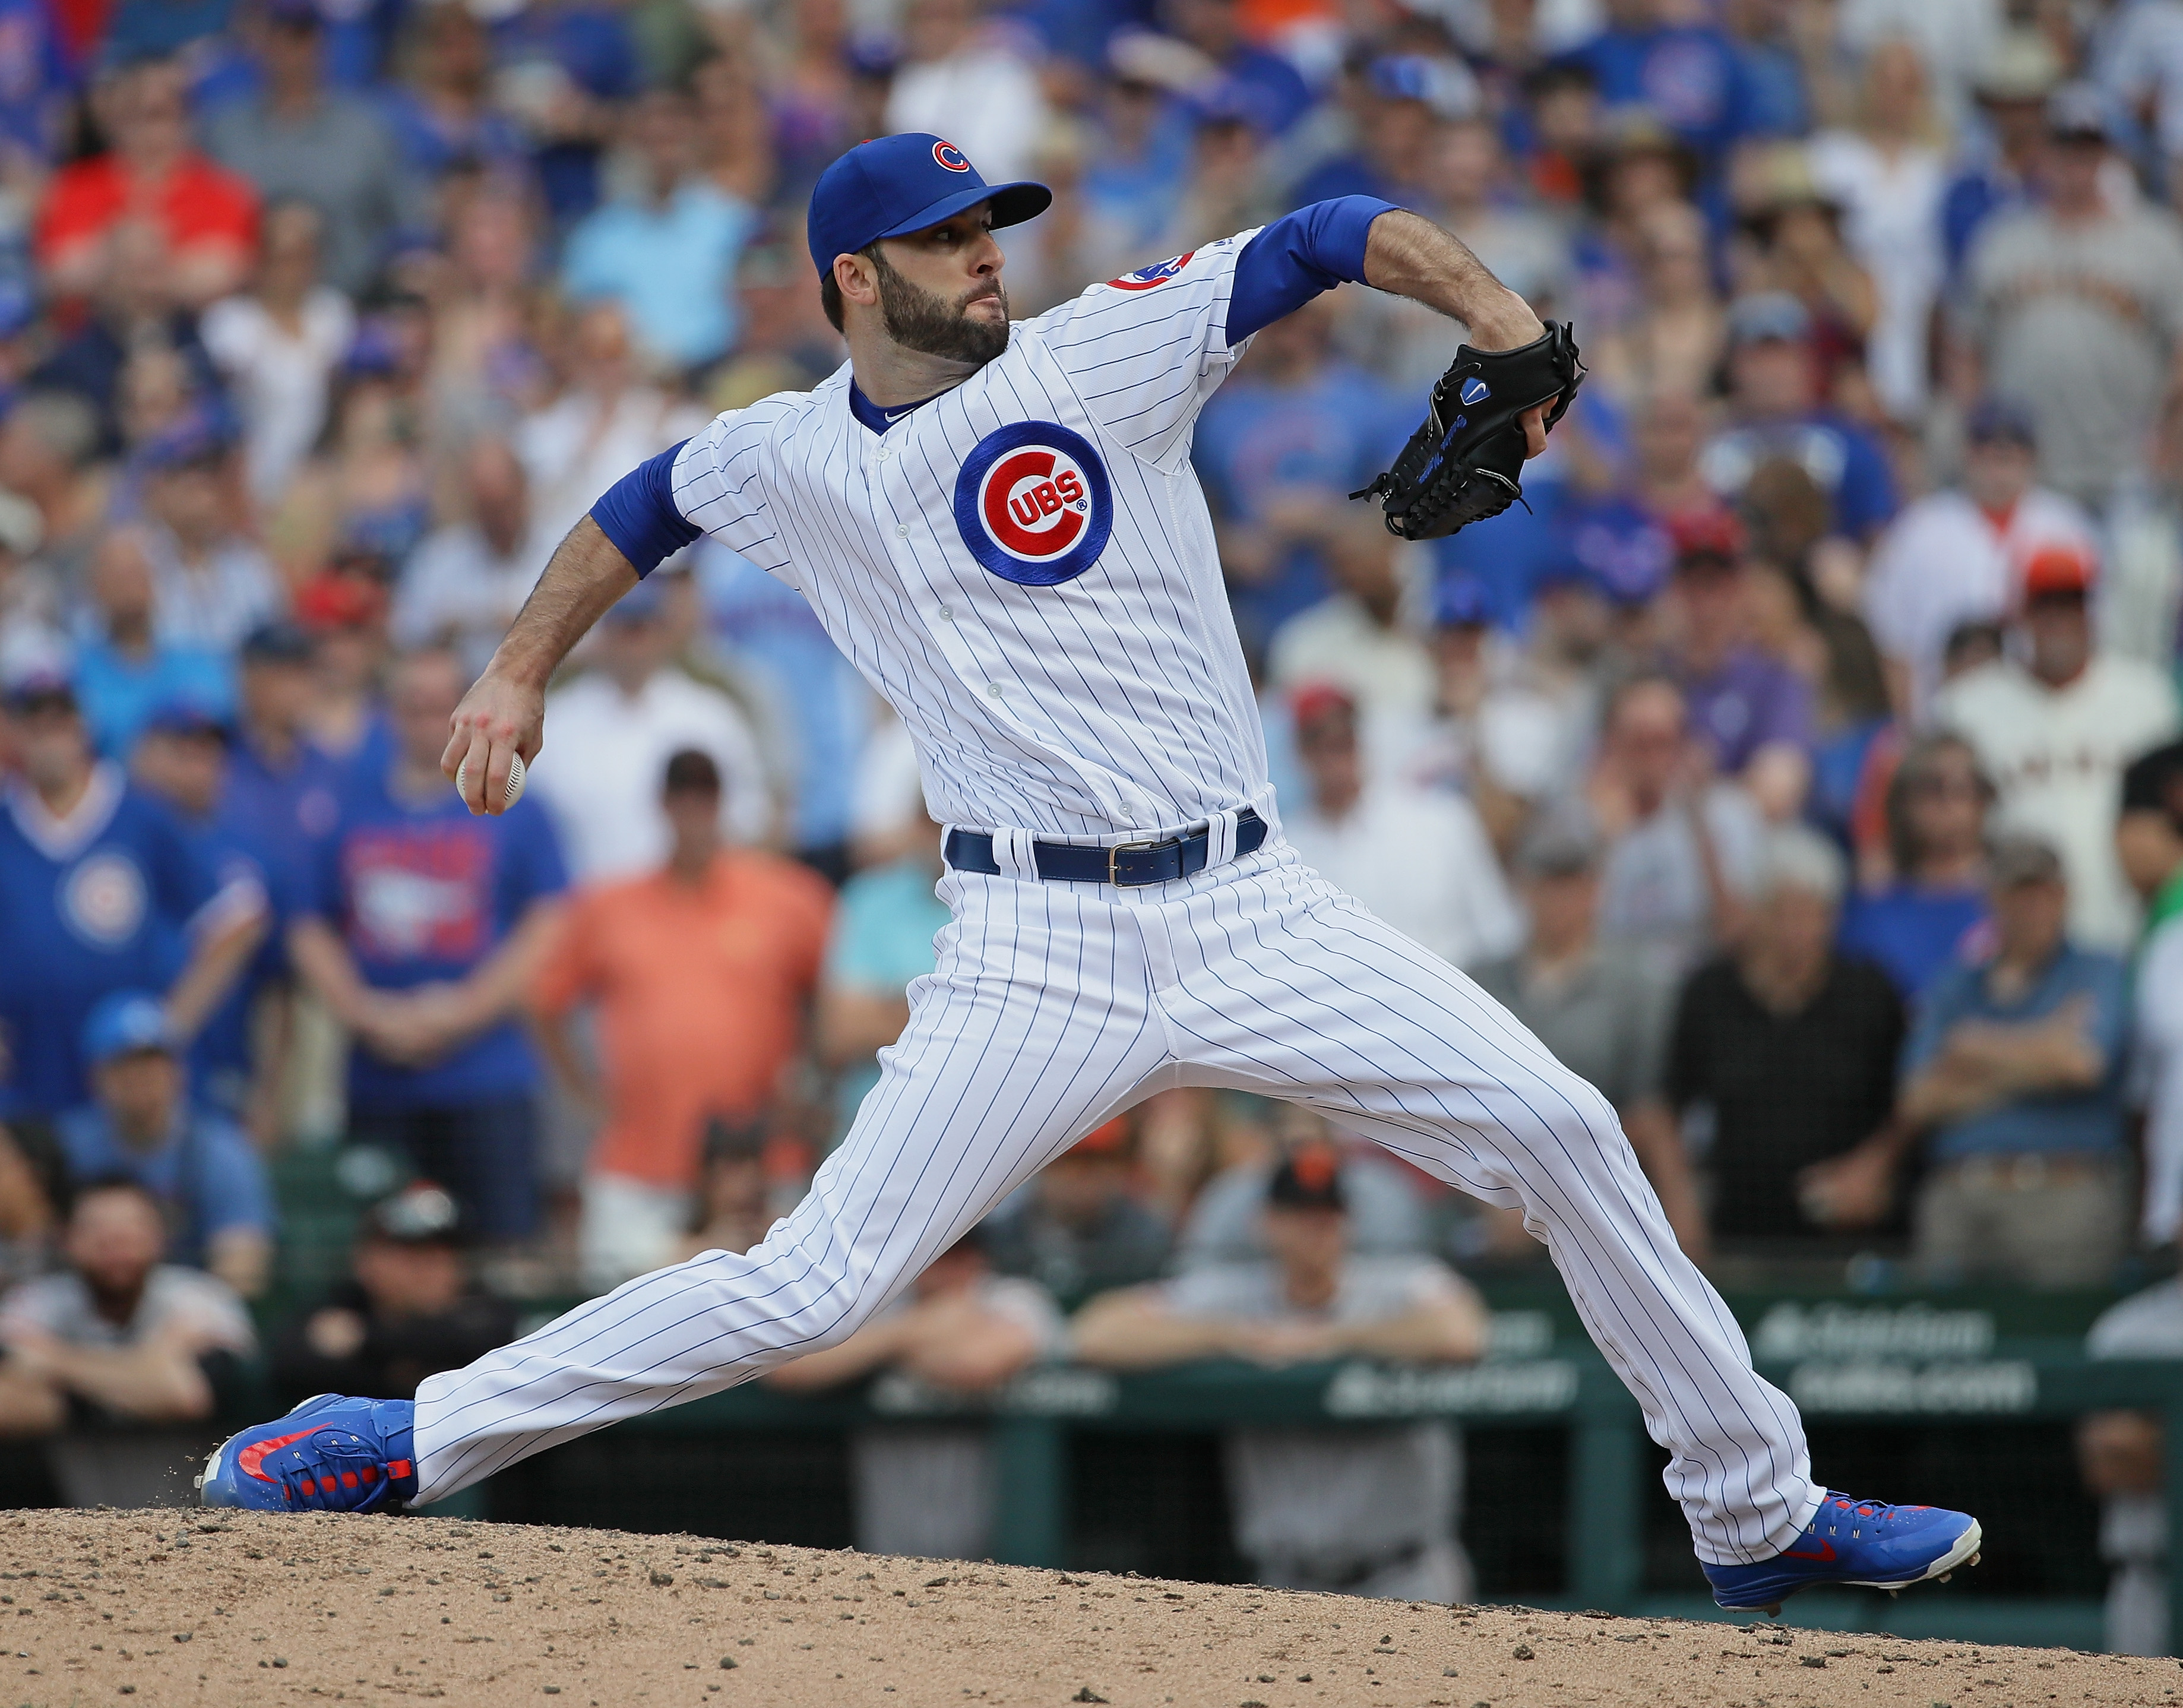 Are baseball players athletes? debate takes dramatic turn as Cubs